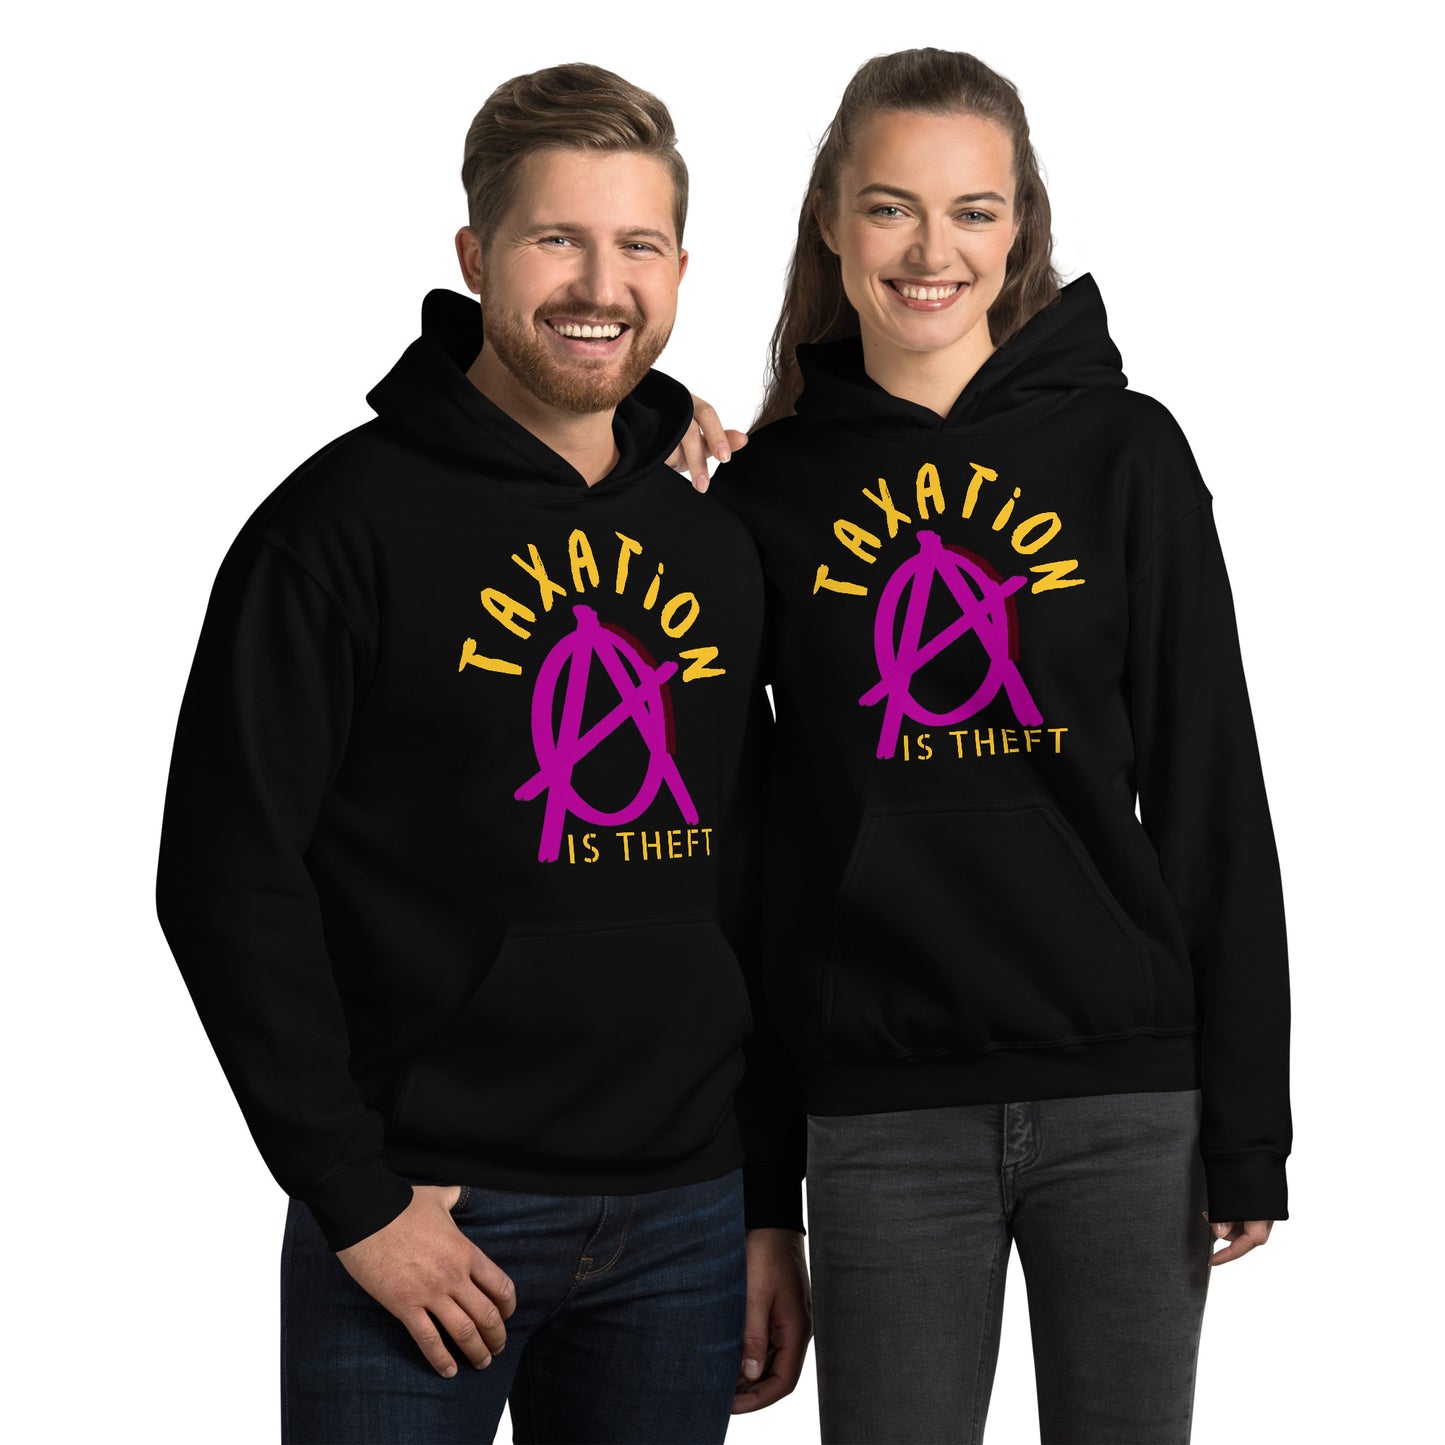 Anarchy Wear Pink "Taxation Is Theft" Hoodie